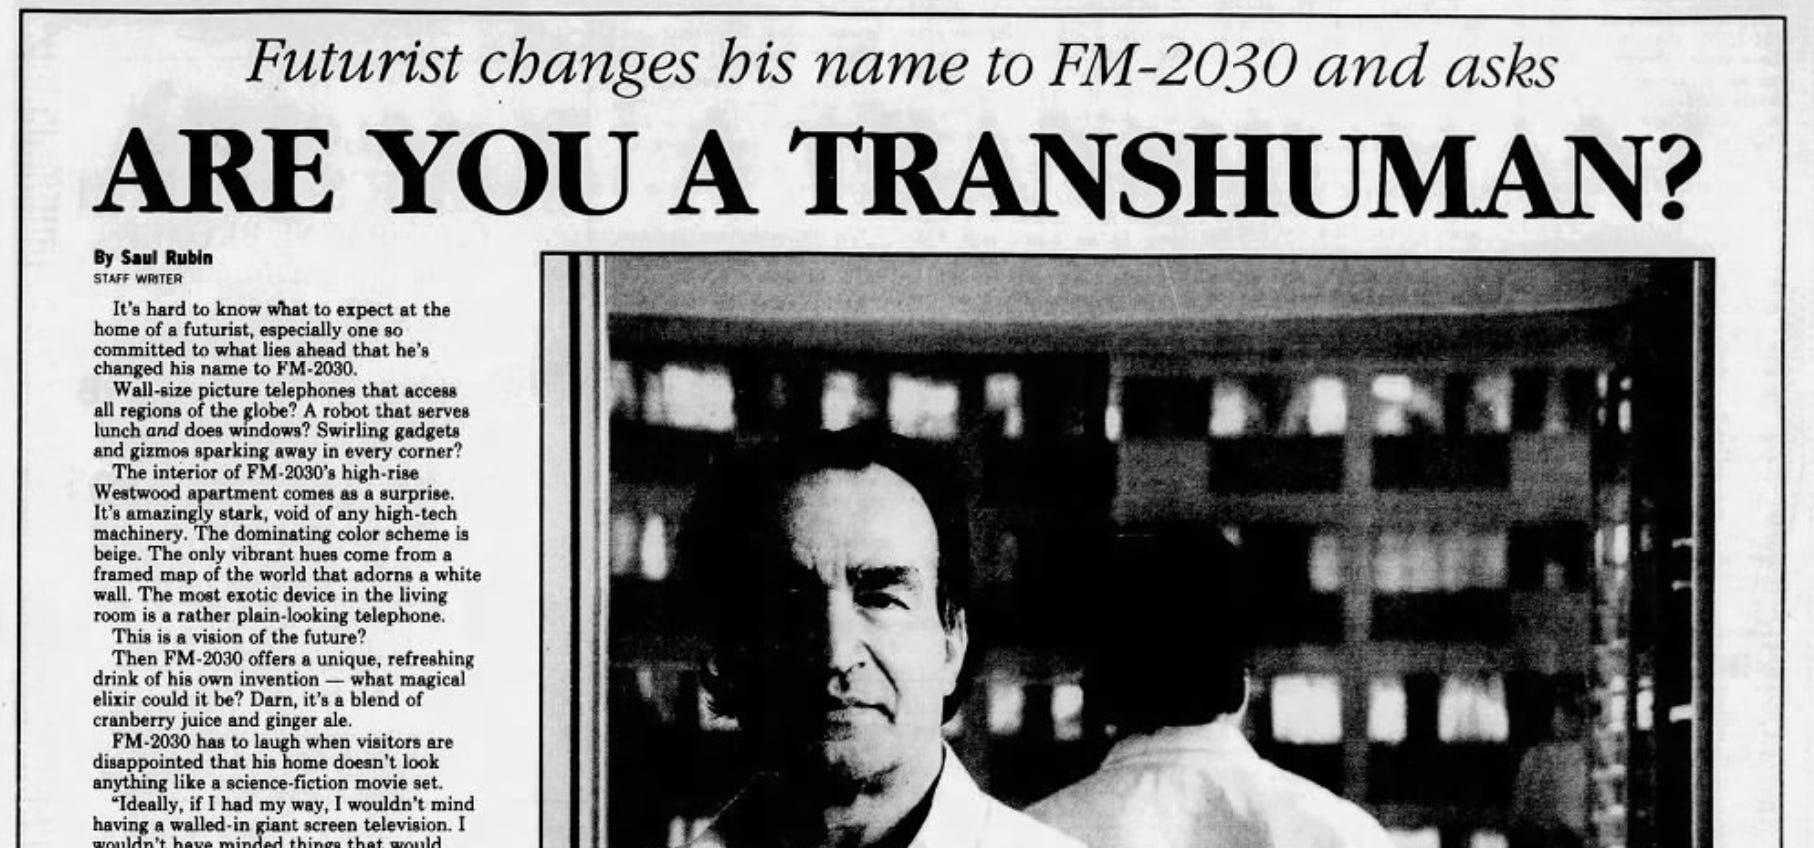 Screenshot of a 1969 news article about transhumanism